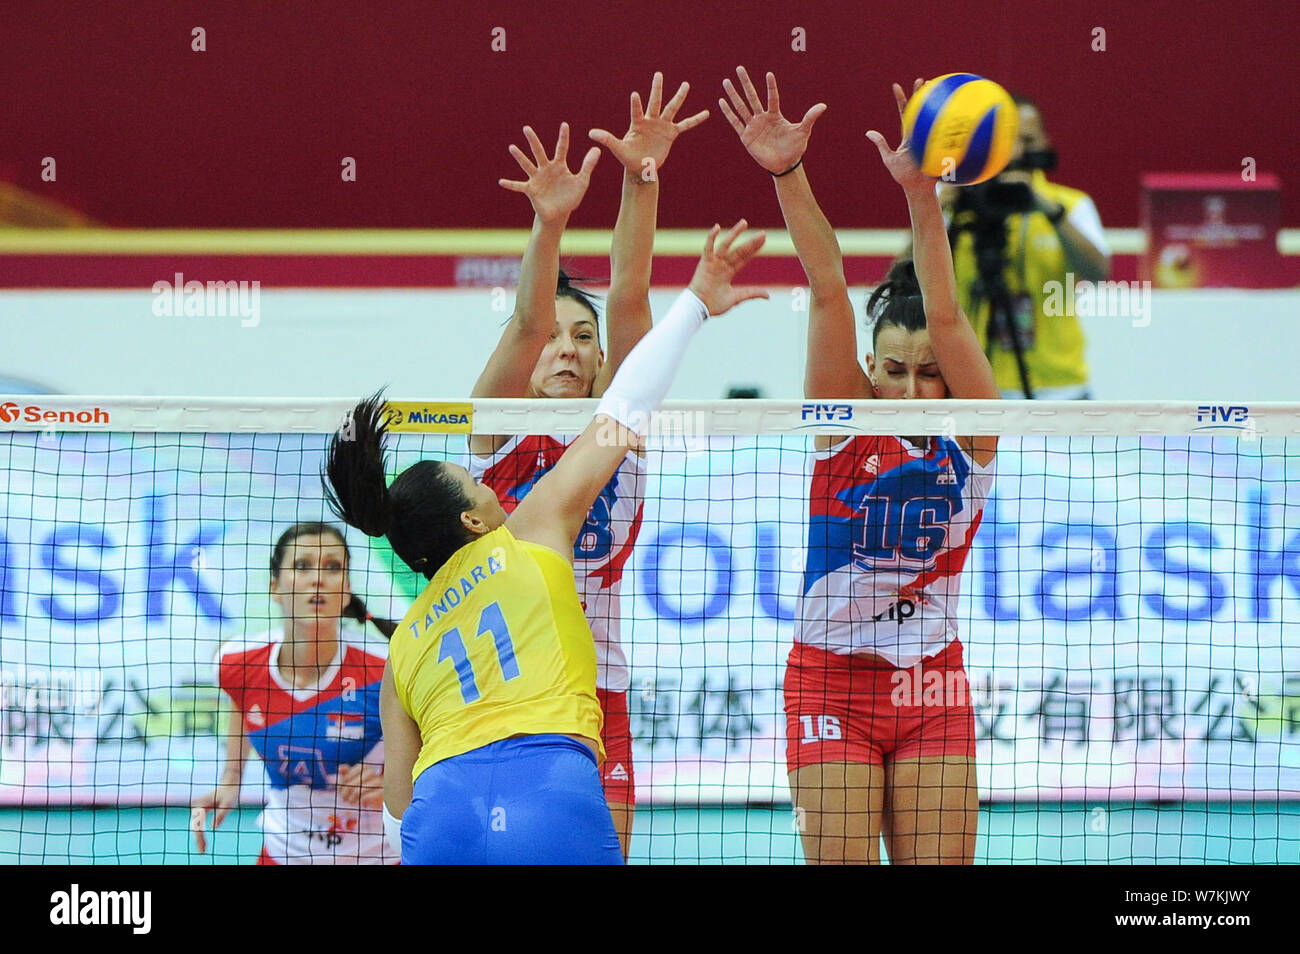 Tandara Caixeta of Brazil spikes against Tijana Boskovic and Milena Rasic of Serbia during their match of the FIVB Volleyball World Grand Prix Finals Stock Photo